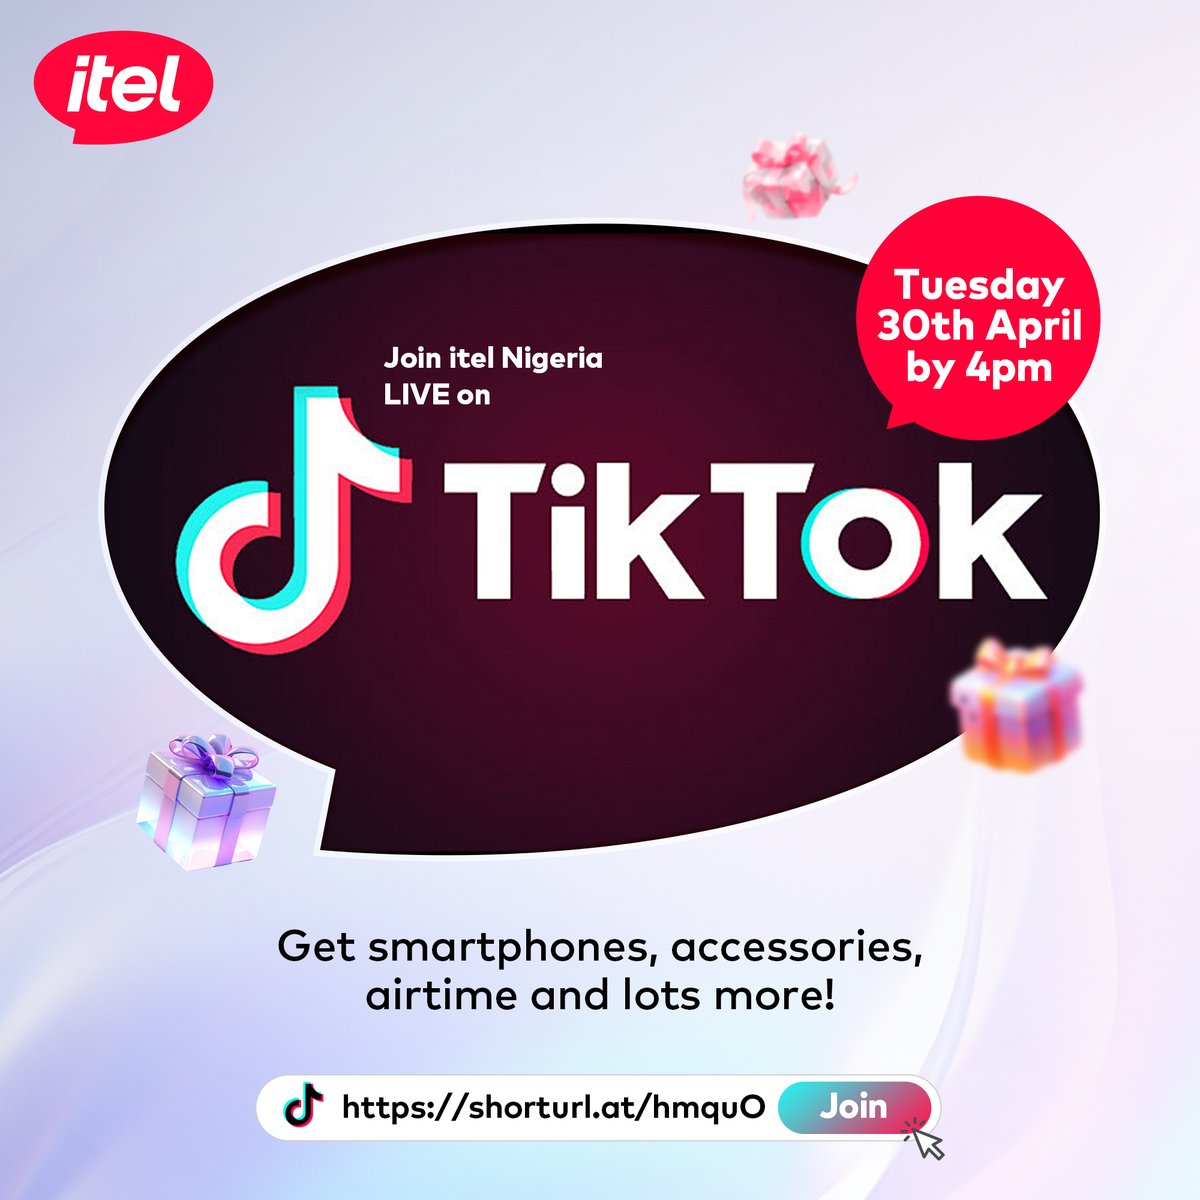 It's TikTok time!! Join us by 4PM today on TikTok for another exciting session of itel Unfiltered! As usual, you know gifts go dey ground! 😉 Let’s go!!! 👏🏽✨ #itelUnfiltered #itelLiveOnTikTok